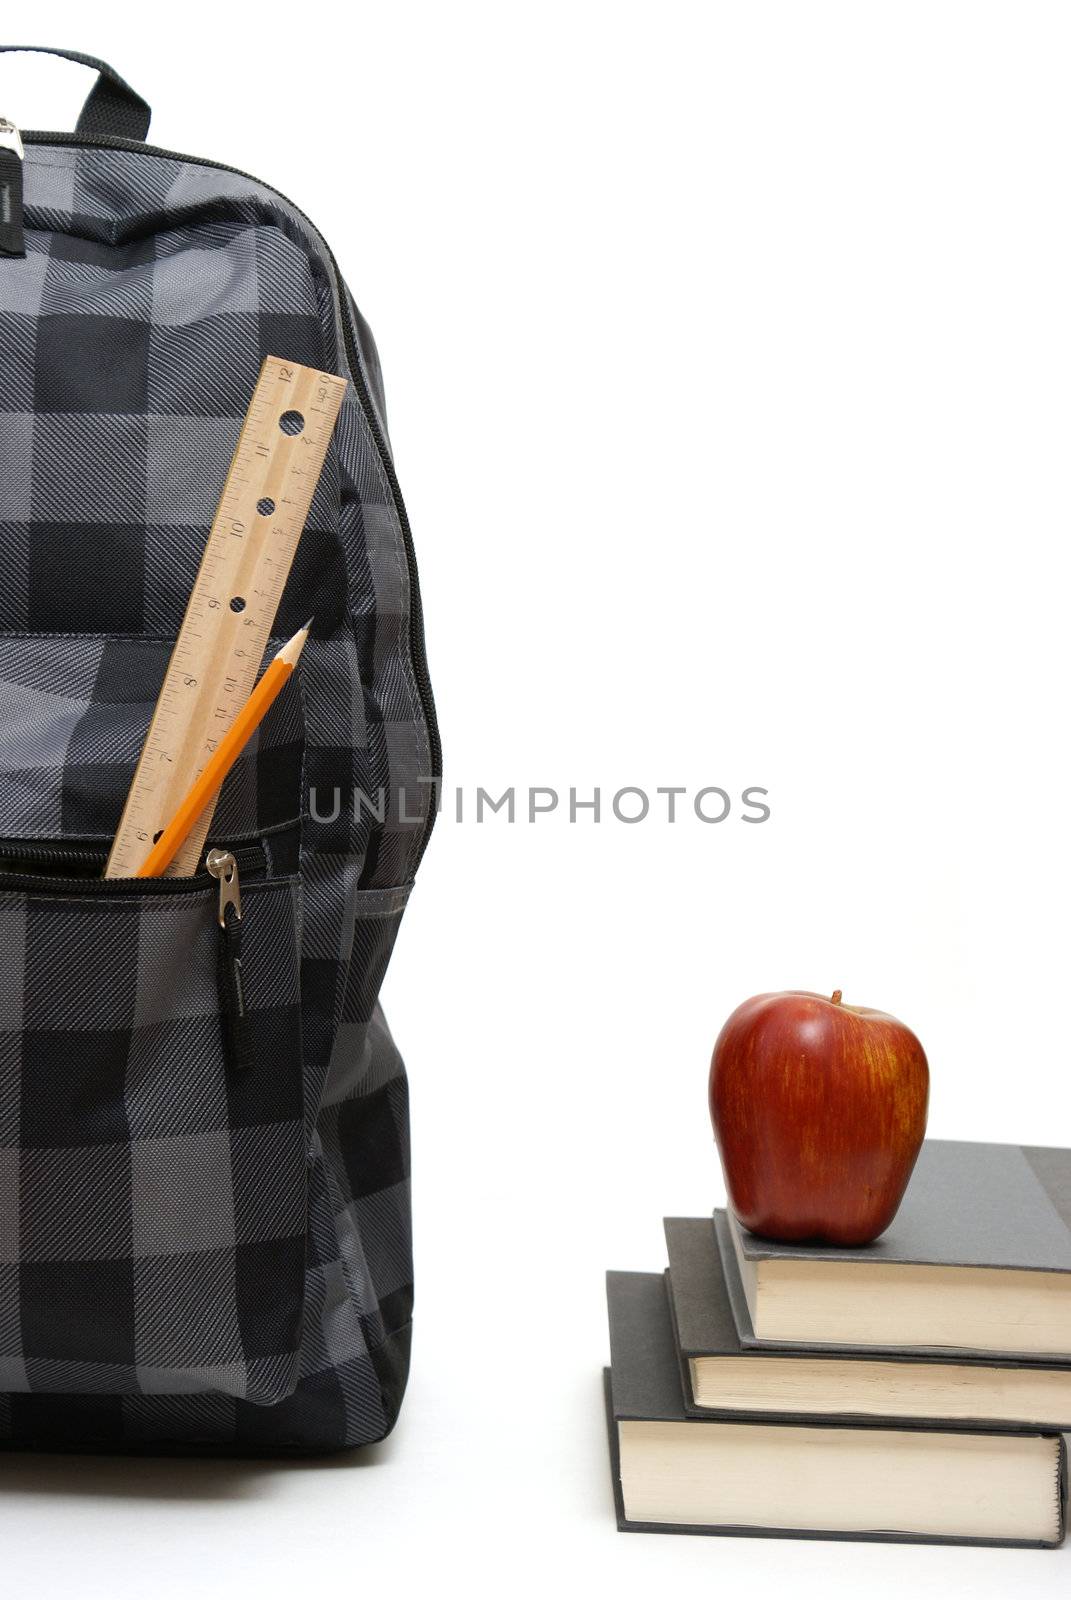 A backpack and some educational books isolated on white.